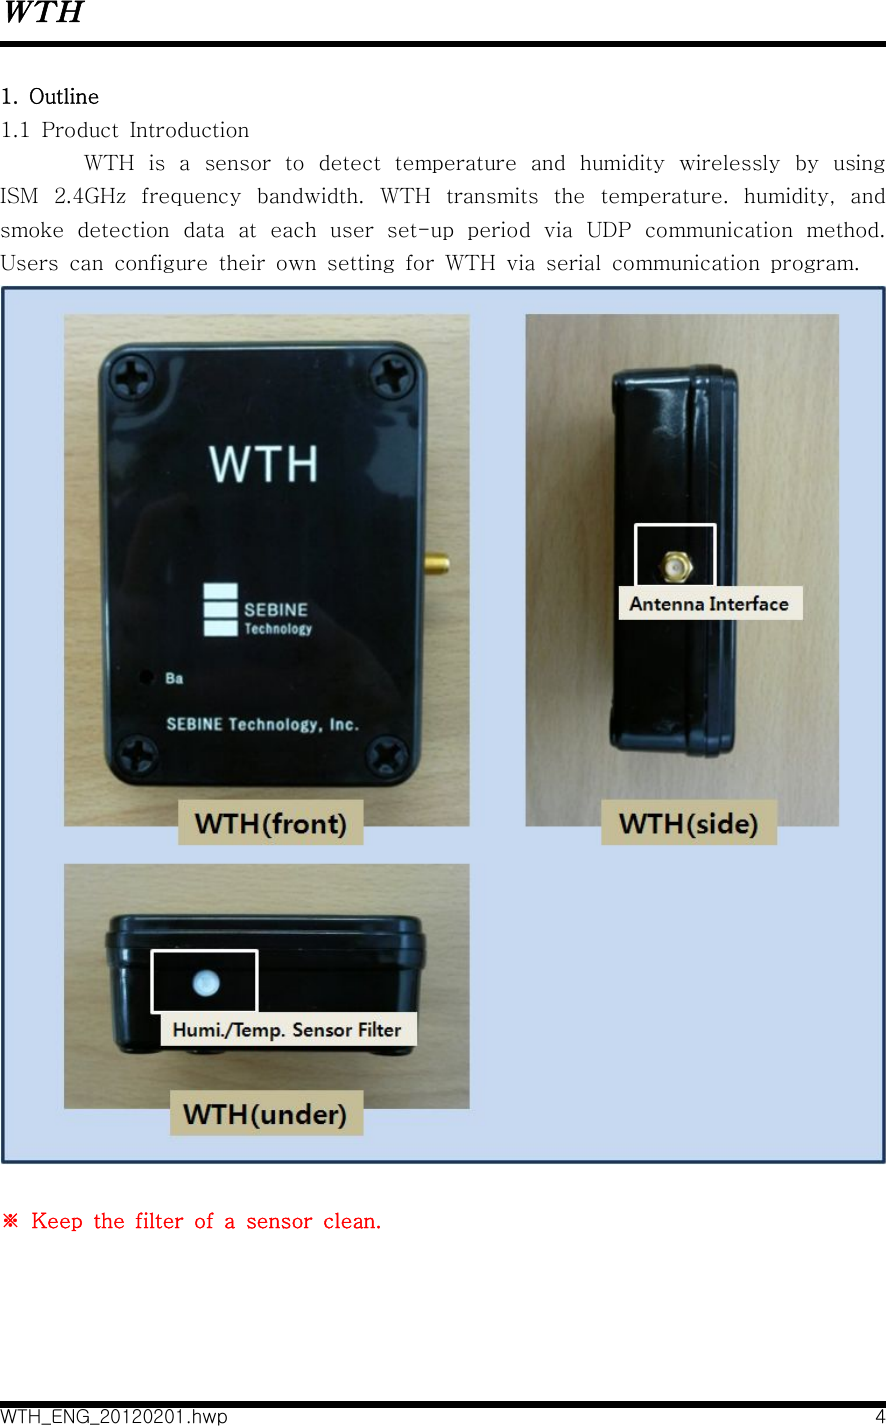 WTHWTH_ENG_20120201.hwp 41.  Outline1.1  Product  IntroductionWTH  is  a  sensor  to  detect  temperature  and  humidity  wirelessly  by  using ISM  2.4GHz  frequency  bandwidth.  WTH  transmits  the  temperature.  humidity,  and smoke  detection  data  at  each  user  set-up  period  via  UDP  communication  method. Users  can  configure  their  own  setting  for  WTH  via  serial  communication  program. ※  Keep  the  filter  of  a  sensor  clean. 